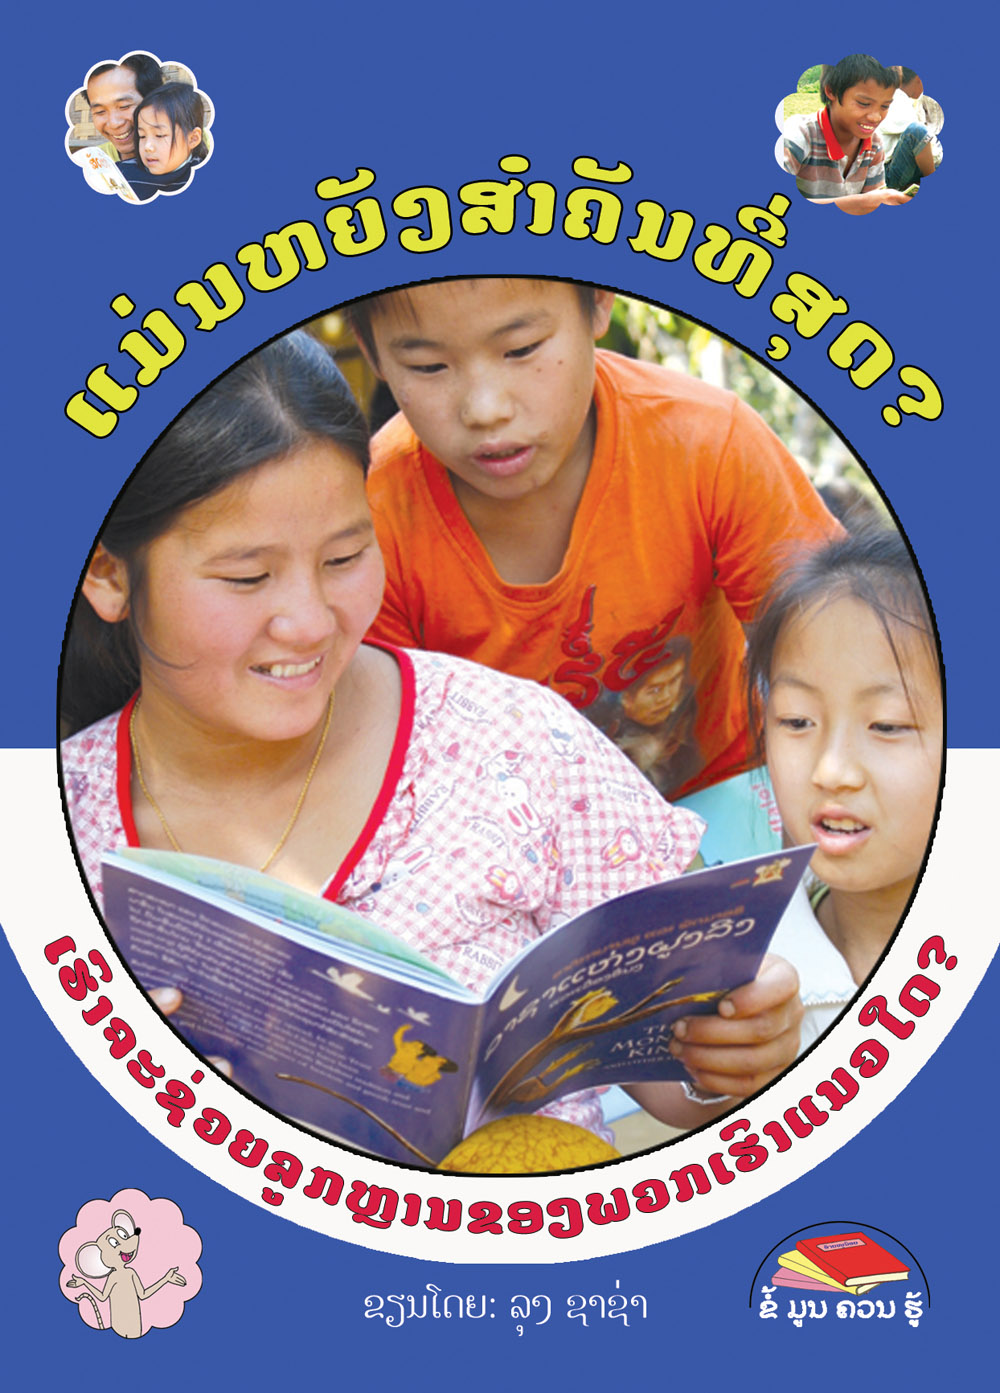 What's Most Important? large book cover, published in Lao language